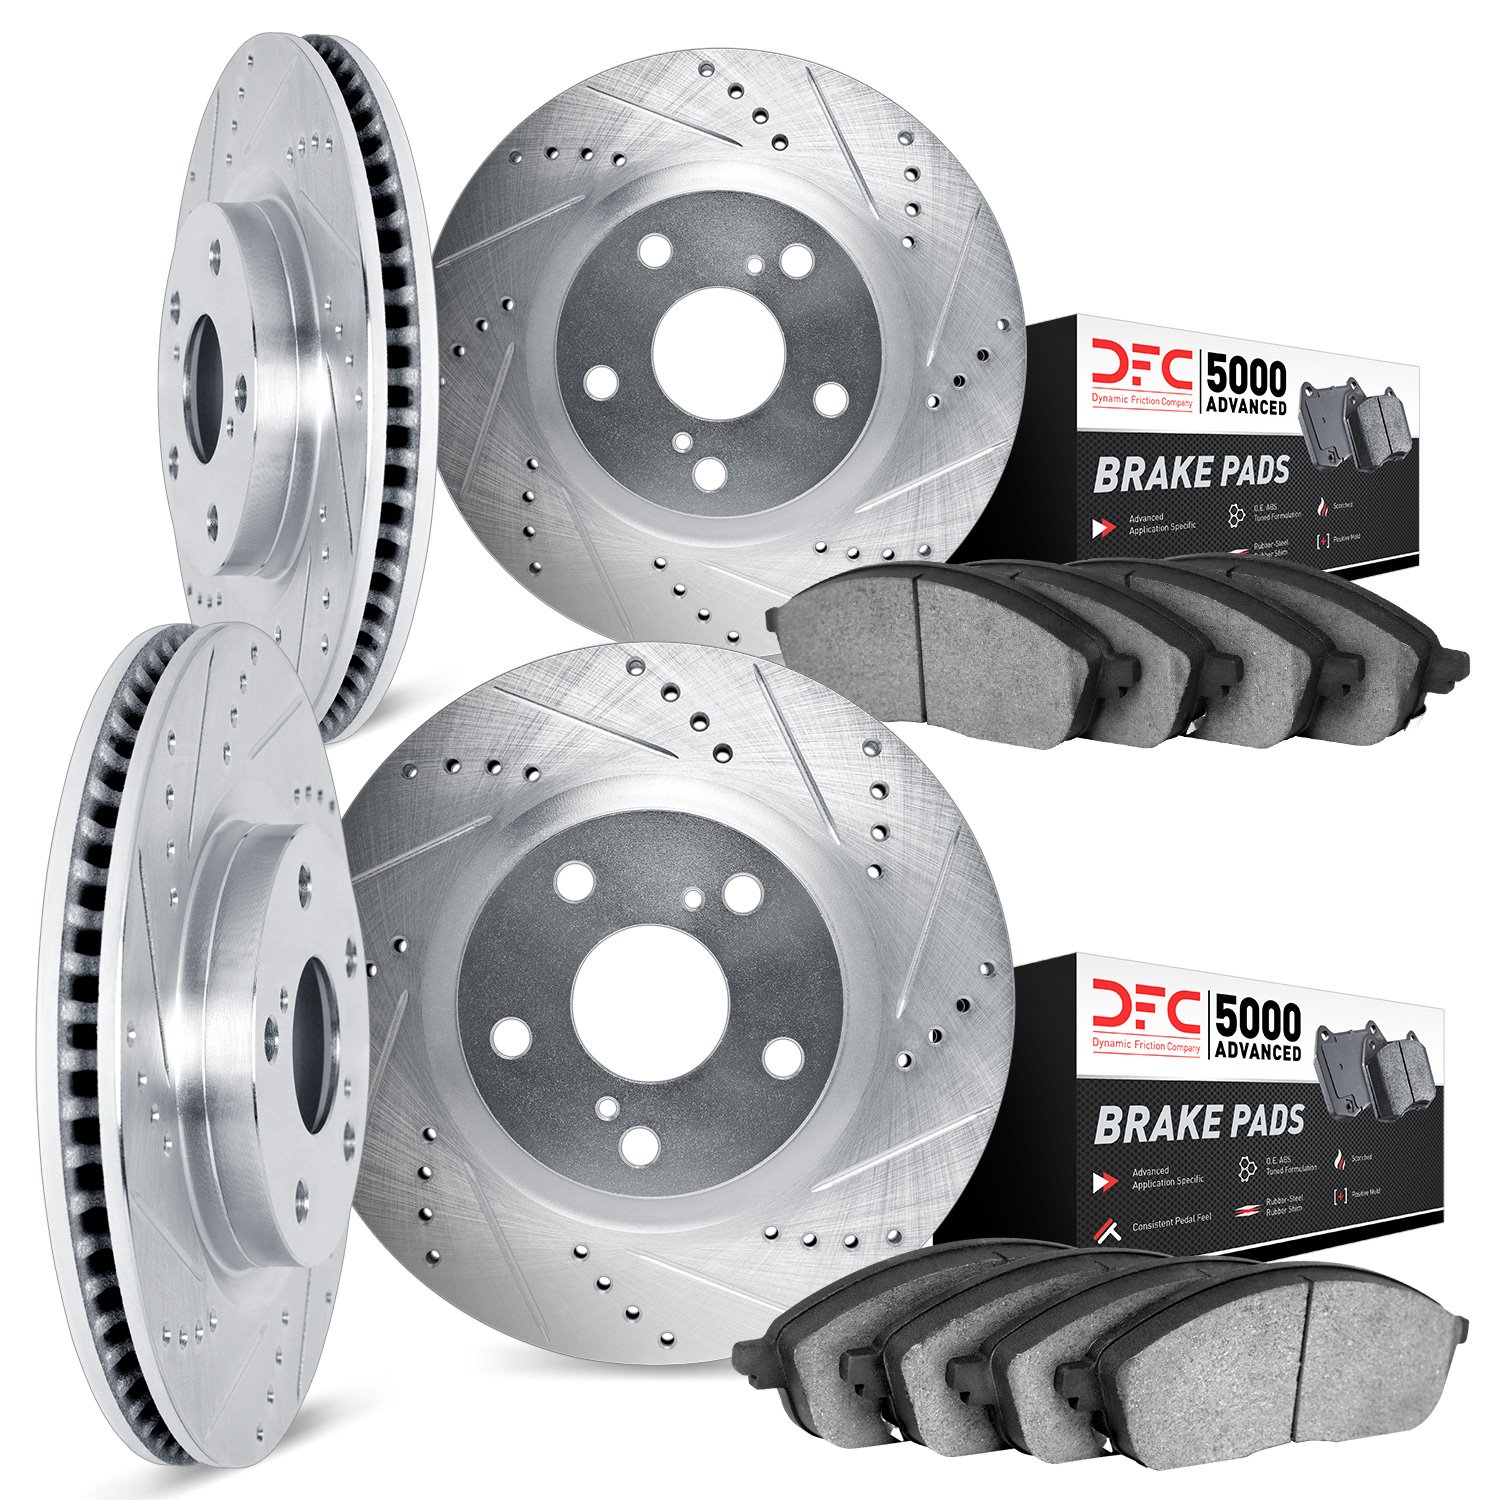 7504-02003 Drilled/Slotted Brake Rotors w/5000 Advanced Brake Pads Kit [Silver], 1977-1988 Porsche, Position: Front and Rear